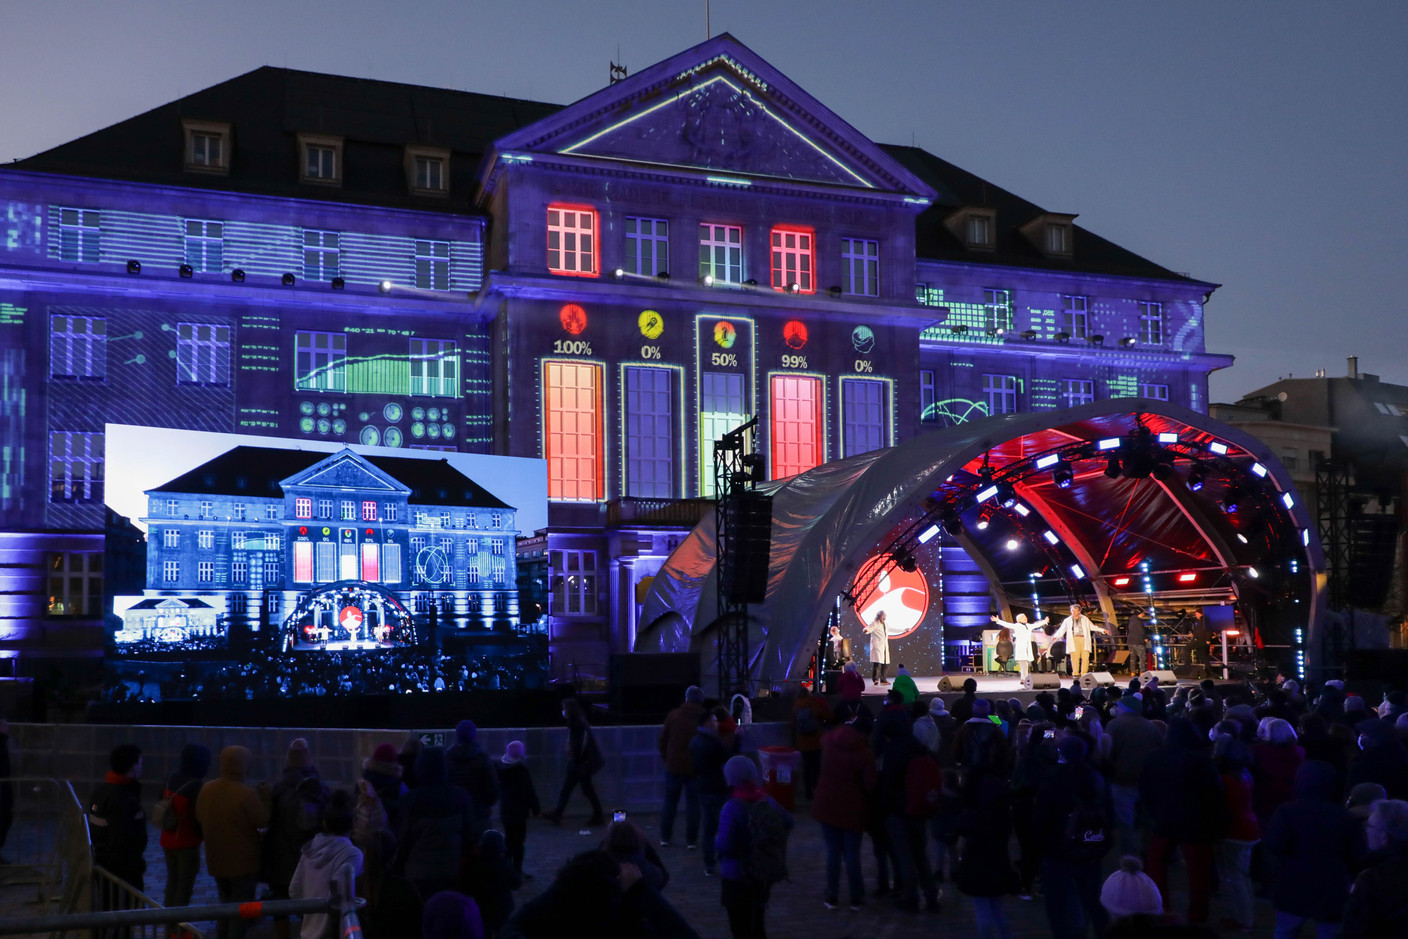 Projections on the walls of the town hall in Esch (Photo: Luc Deflorenne) 